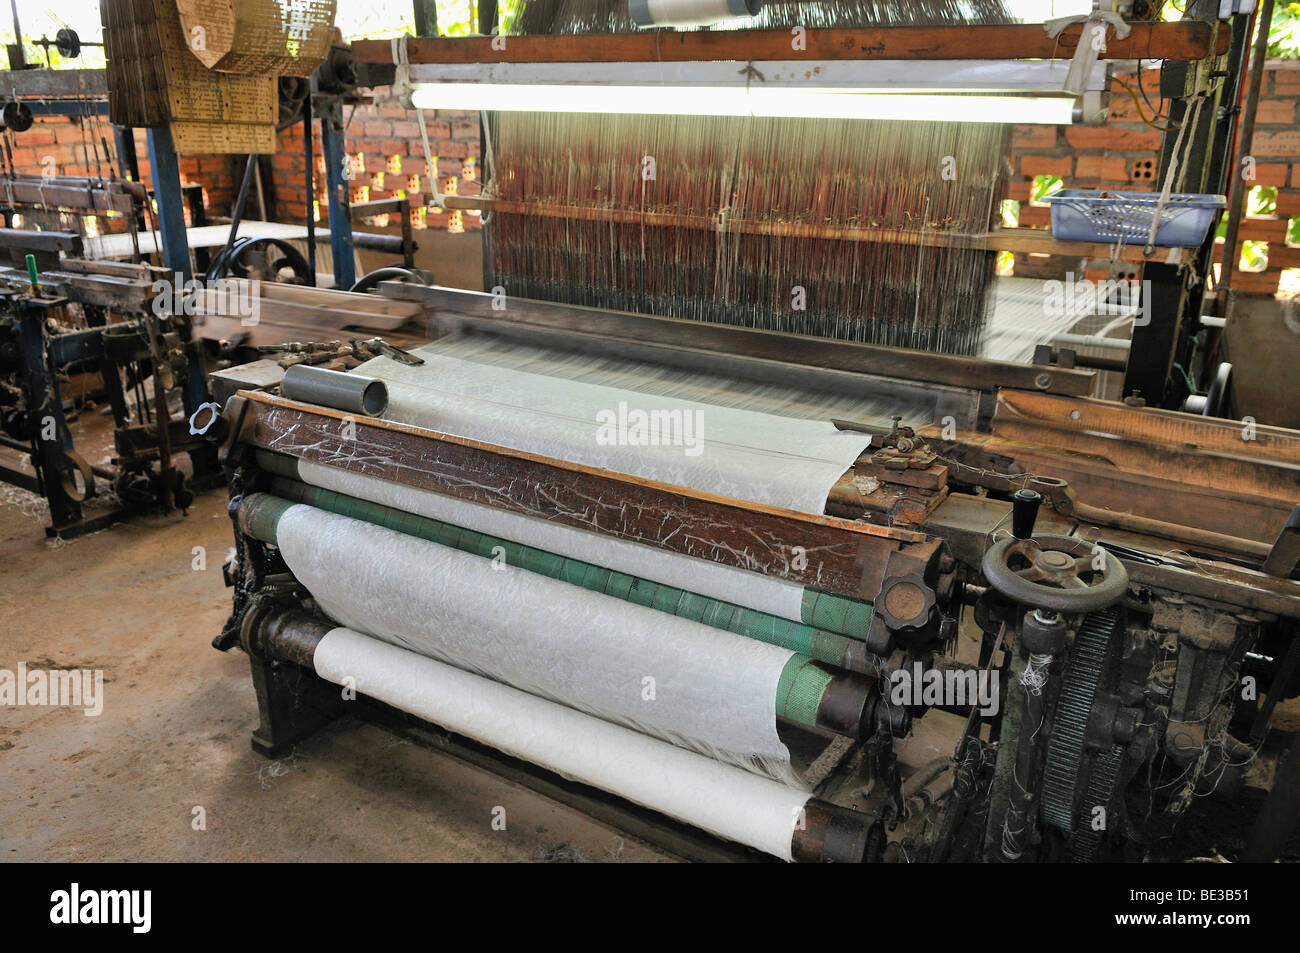 Loom in a silk factory, Dalat, Central Highlands, Vietnam, Asia Stock Photo